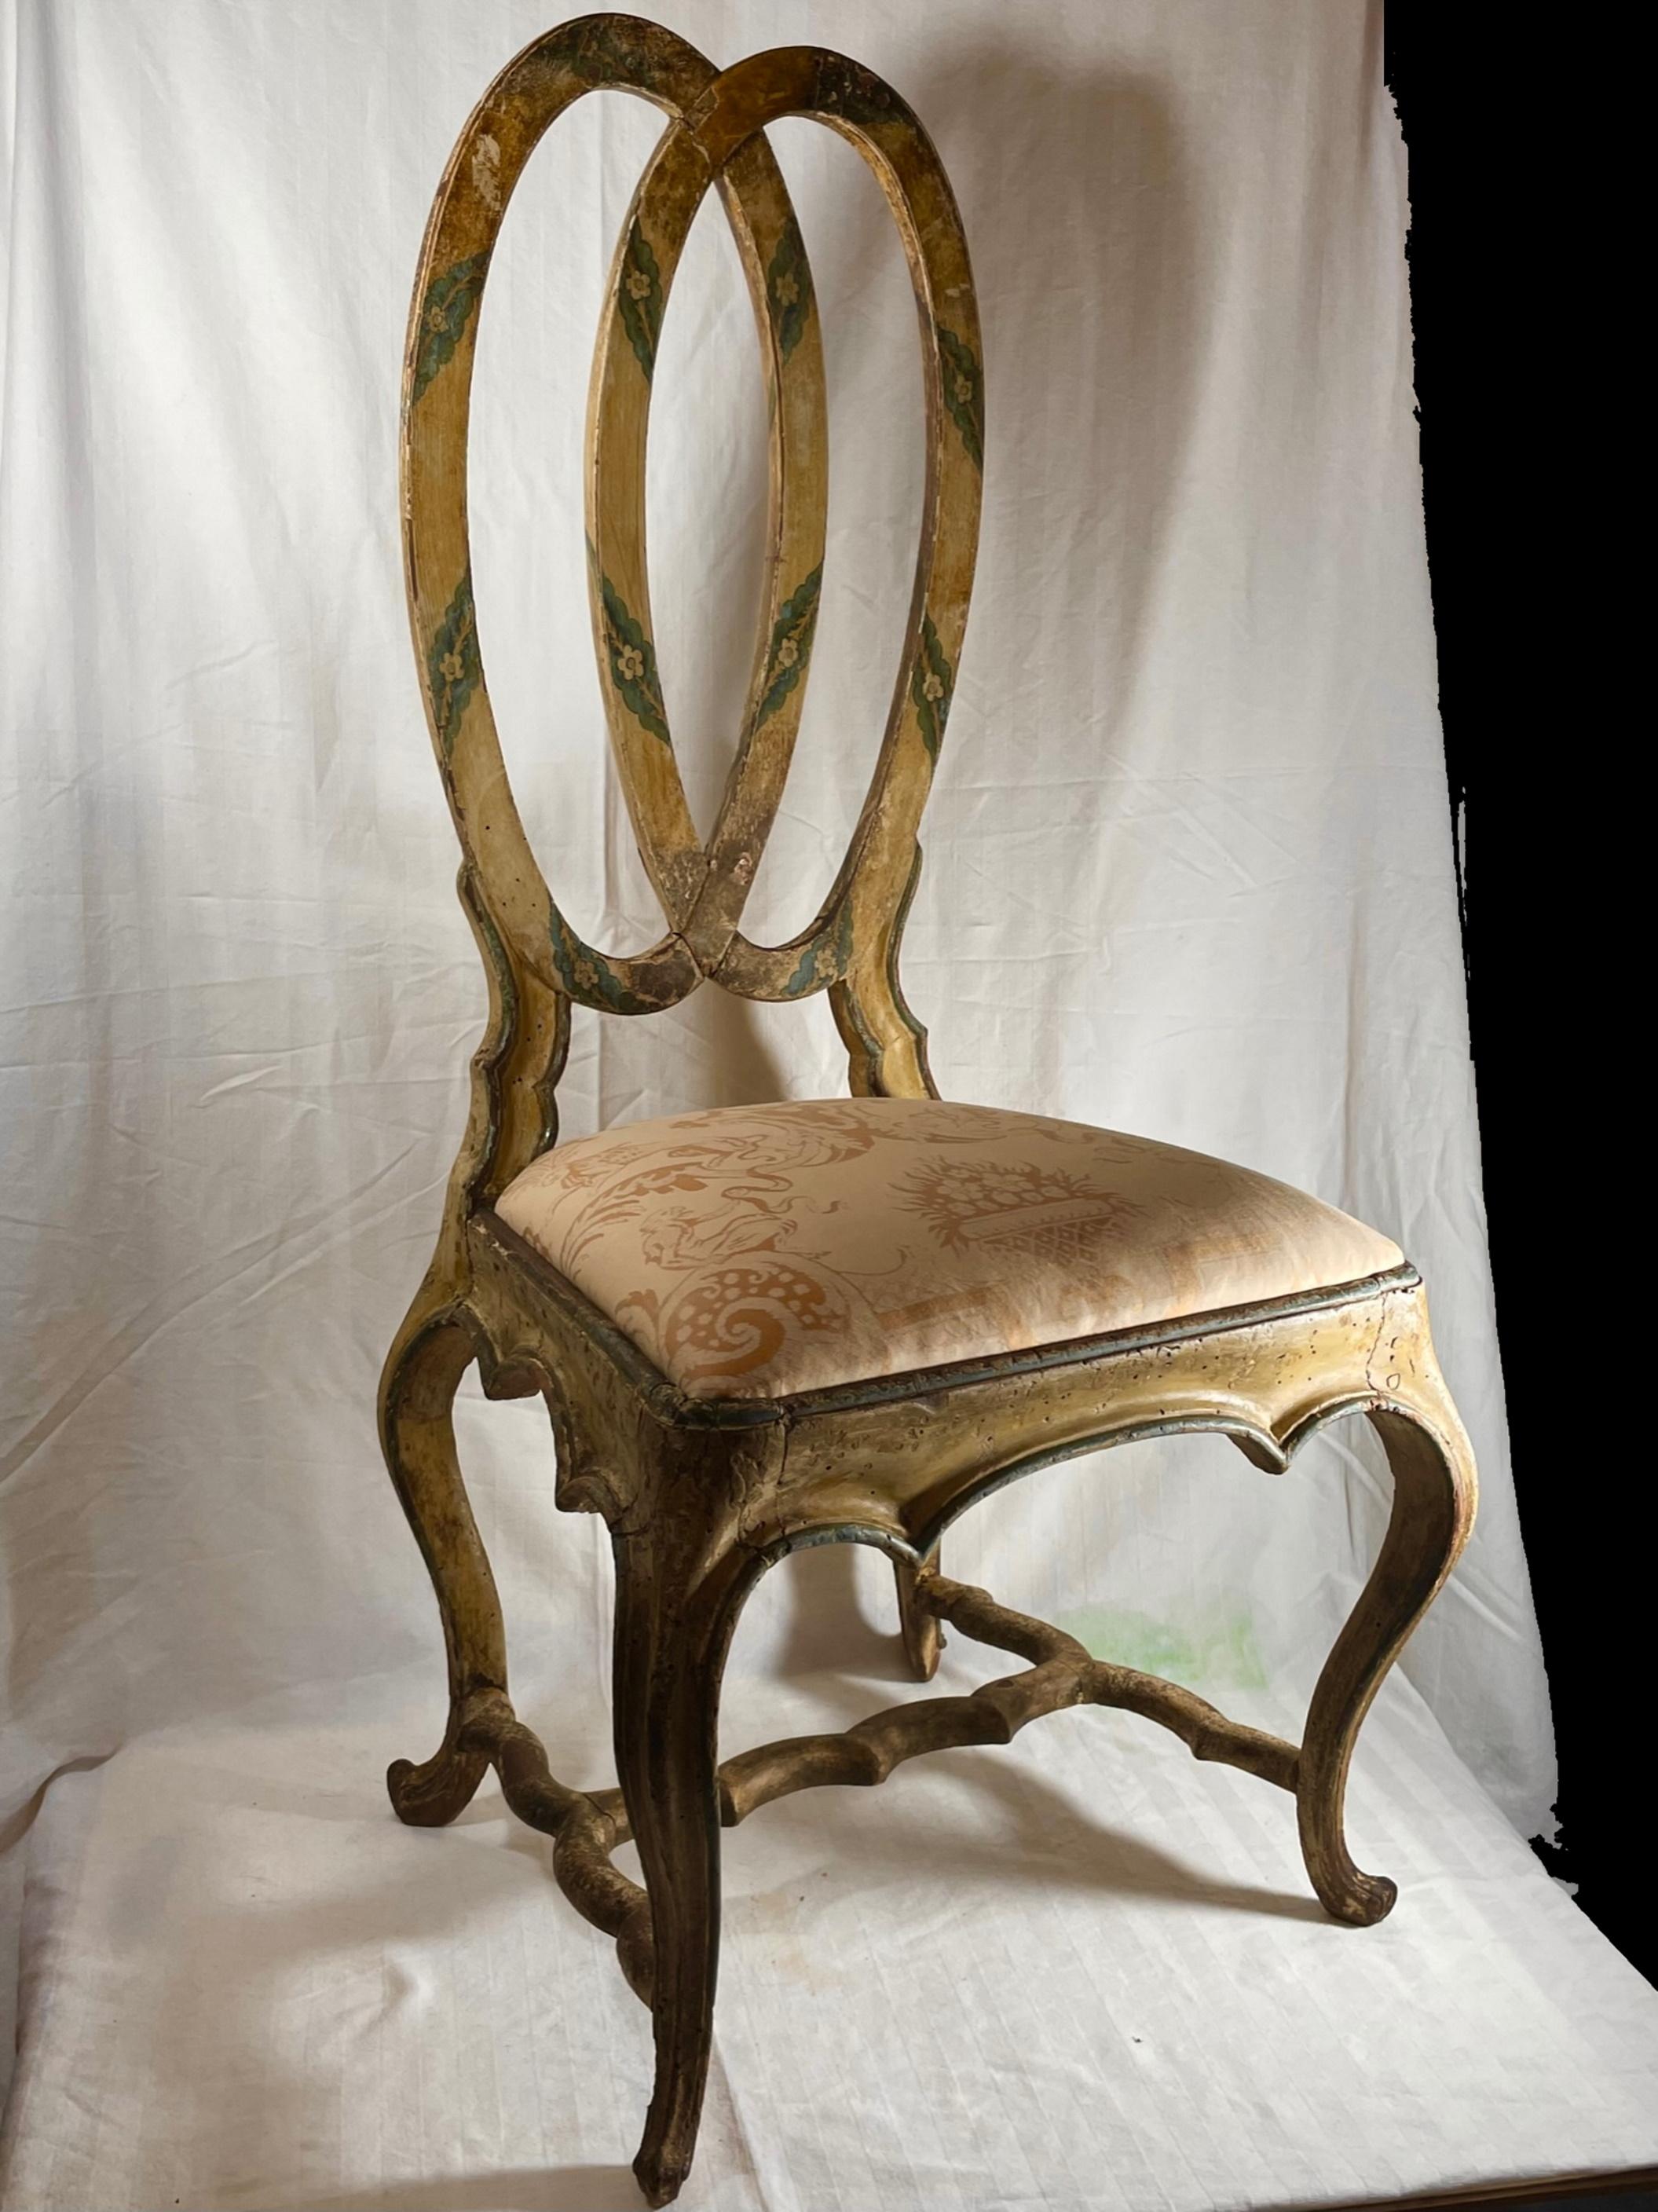 18th Century Venetian Polychrome Painted Rococo Side Chair

Charming polychrome hand painted and masterfully hand carved Venetian side chair. Cabriole legs are joined by stretchers at their base. This chair with its delicate carved rounded curving